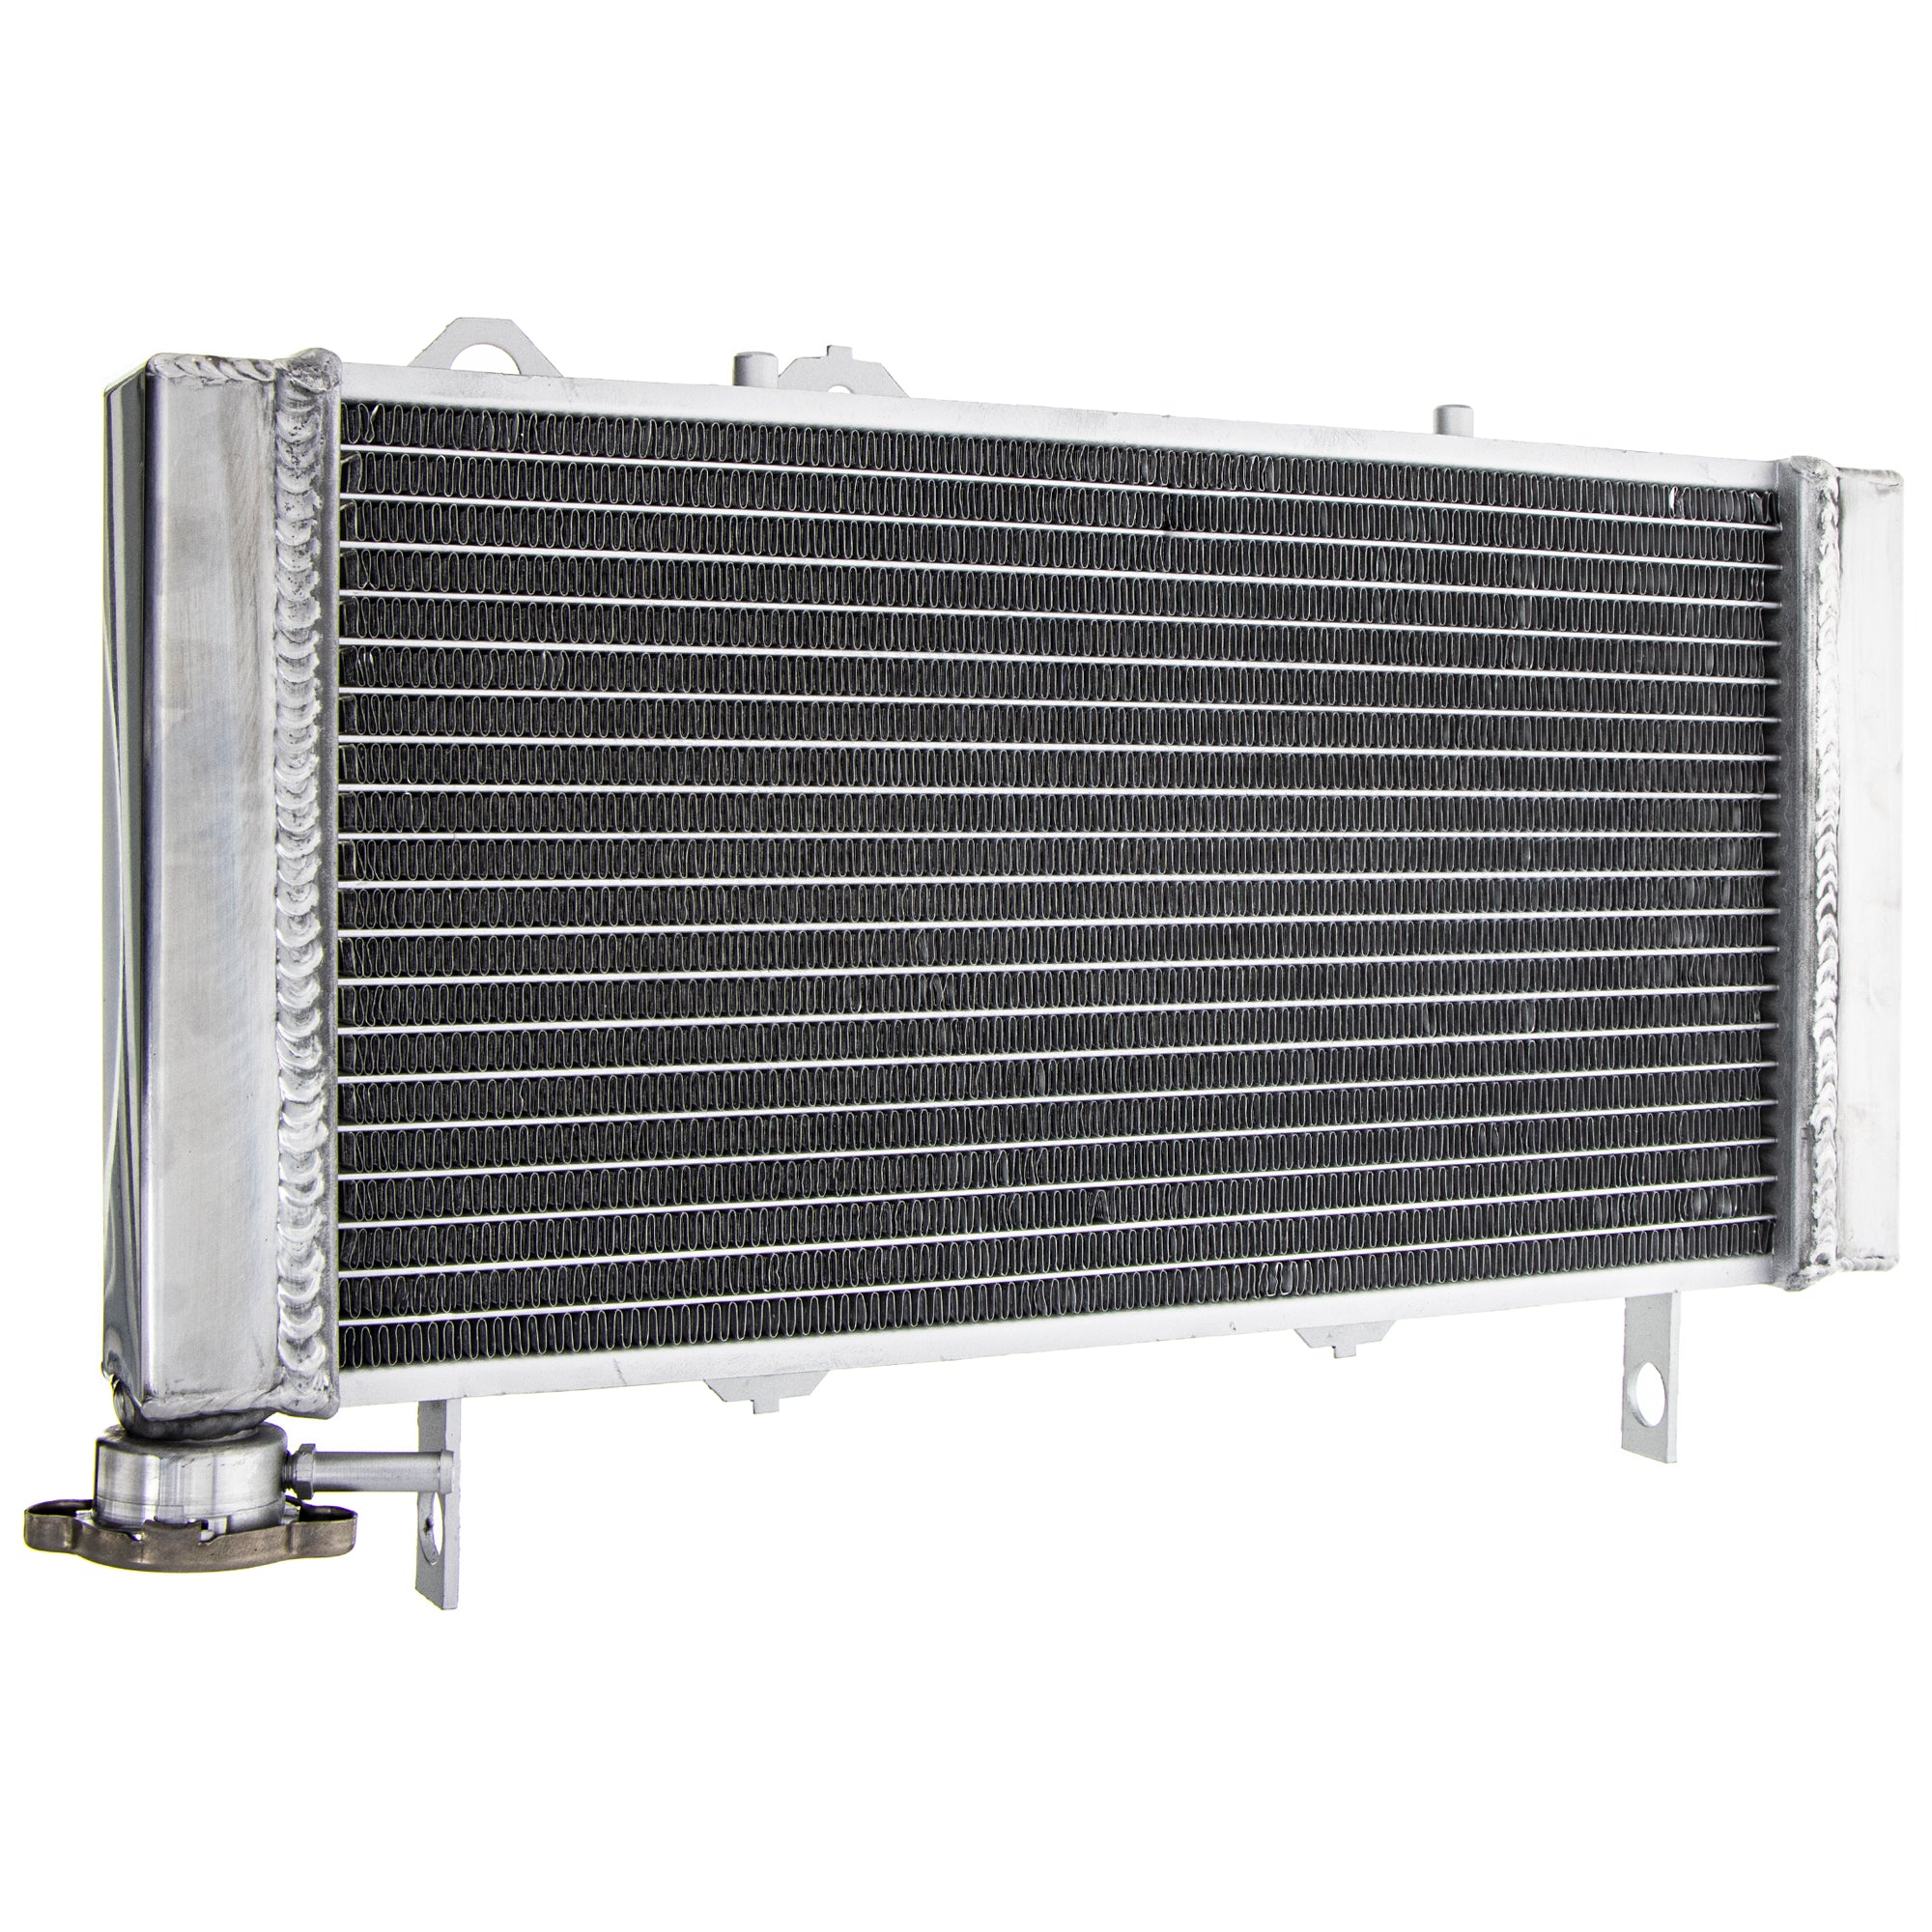 NICHE 519-CRD2254A High Capacity Radiator for zOTHER TRX700